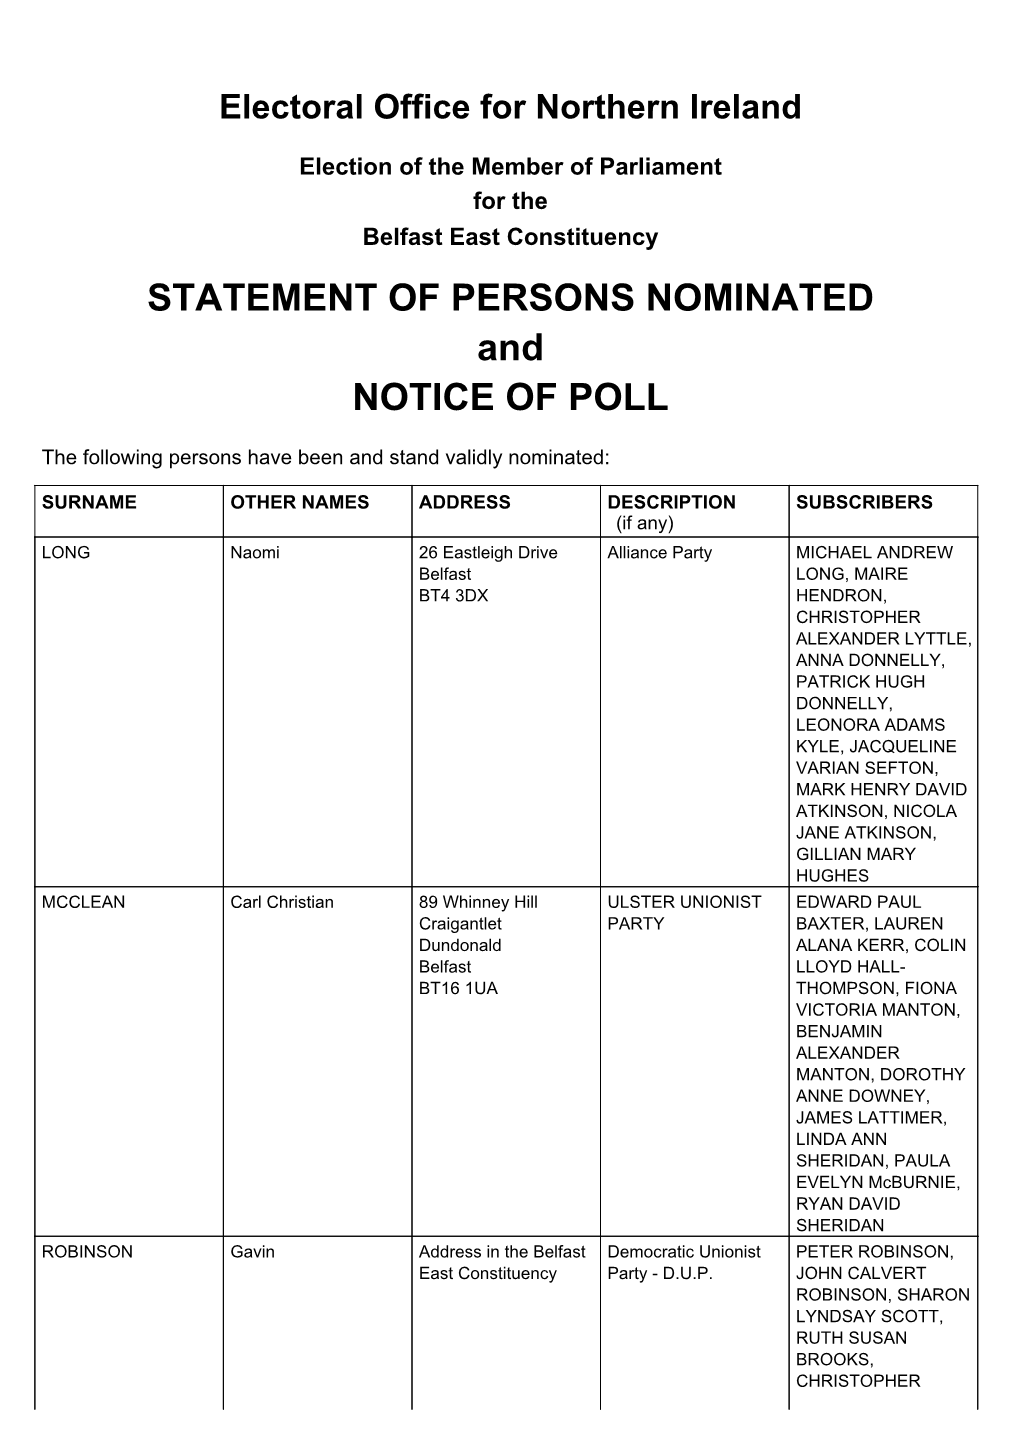 NOTICE of POLL and STATEMENT of PERSONS NOMINATED